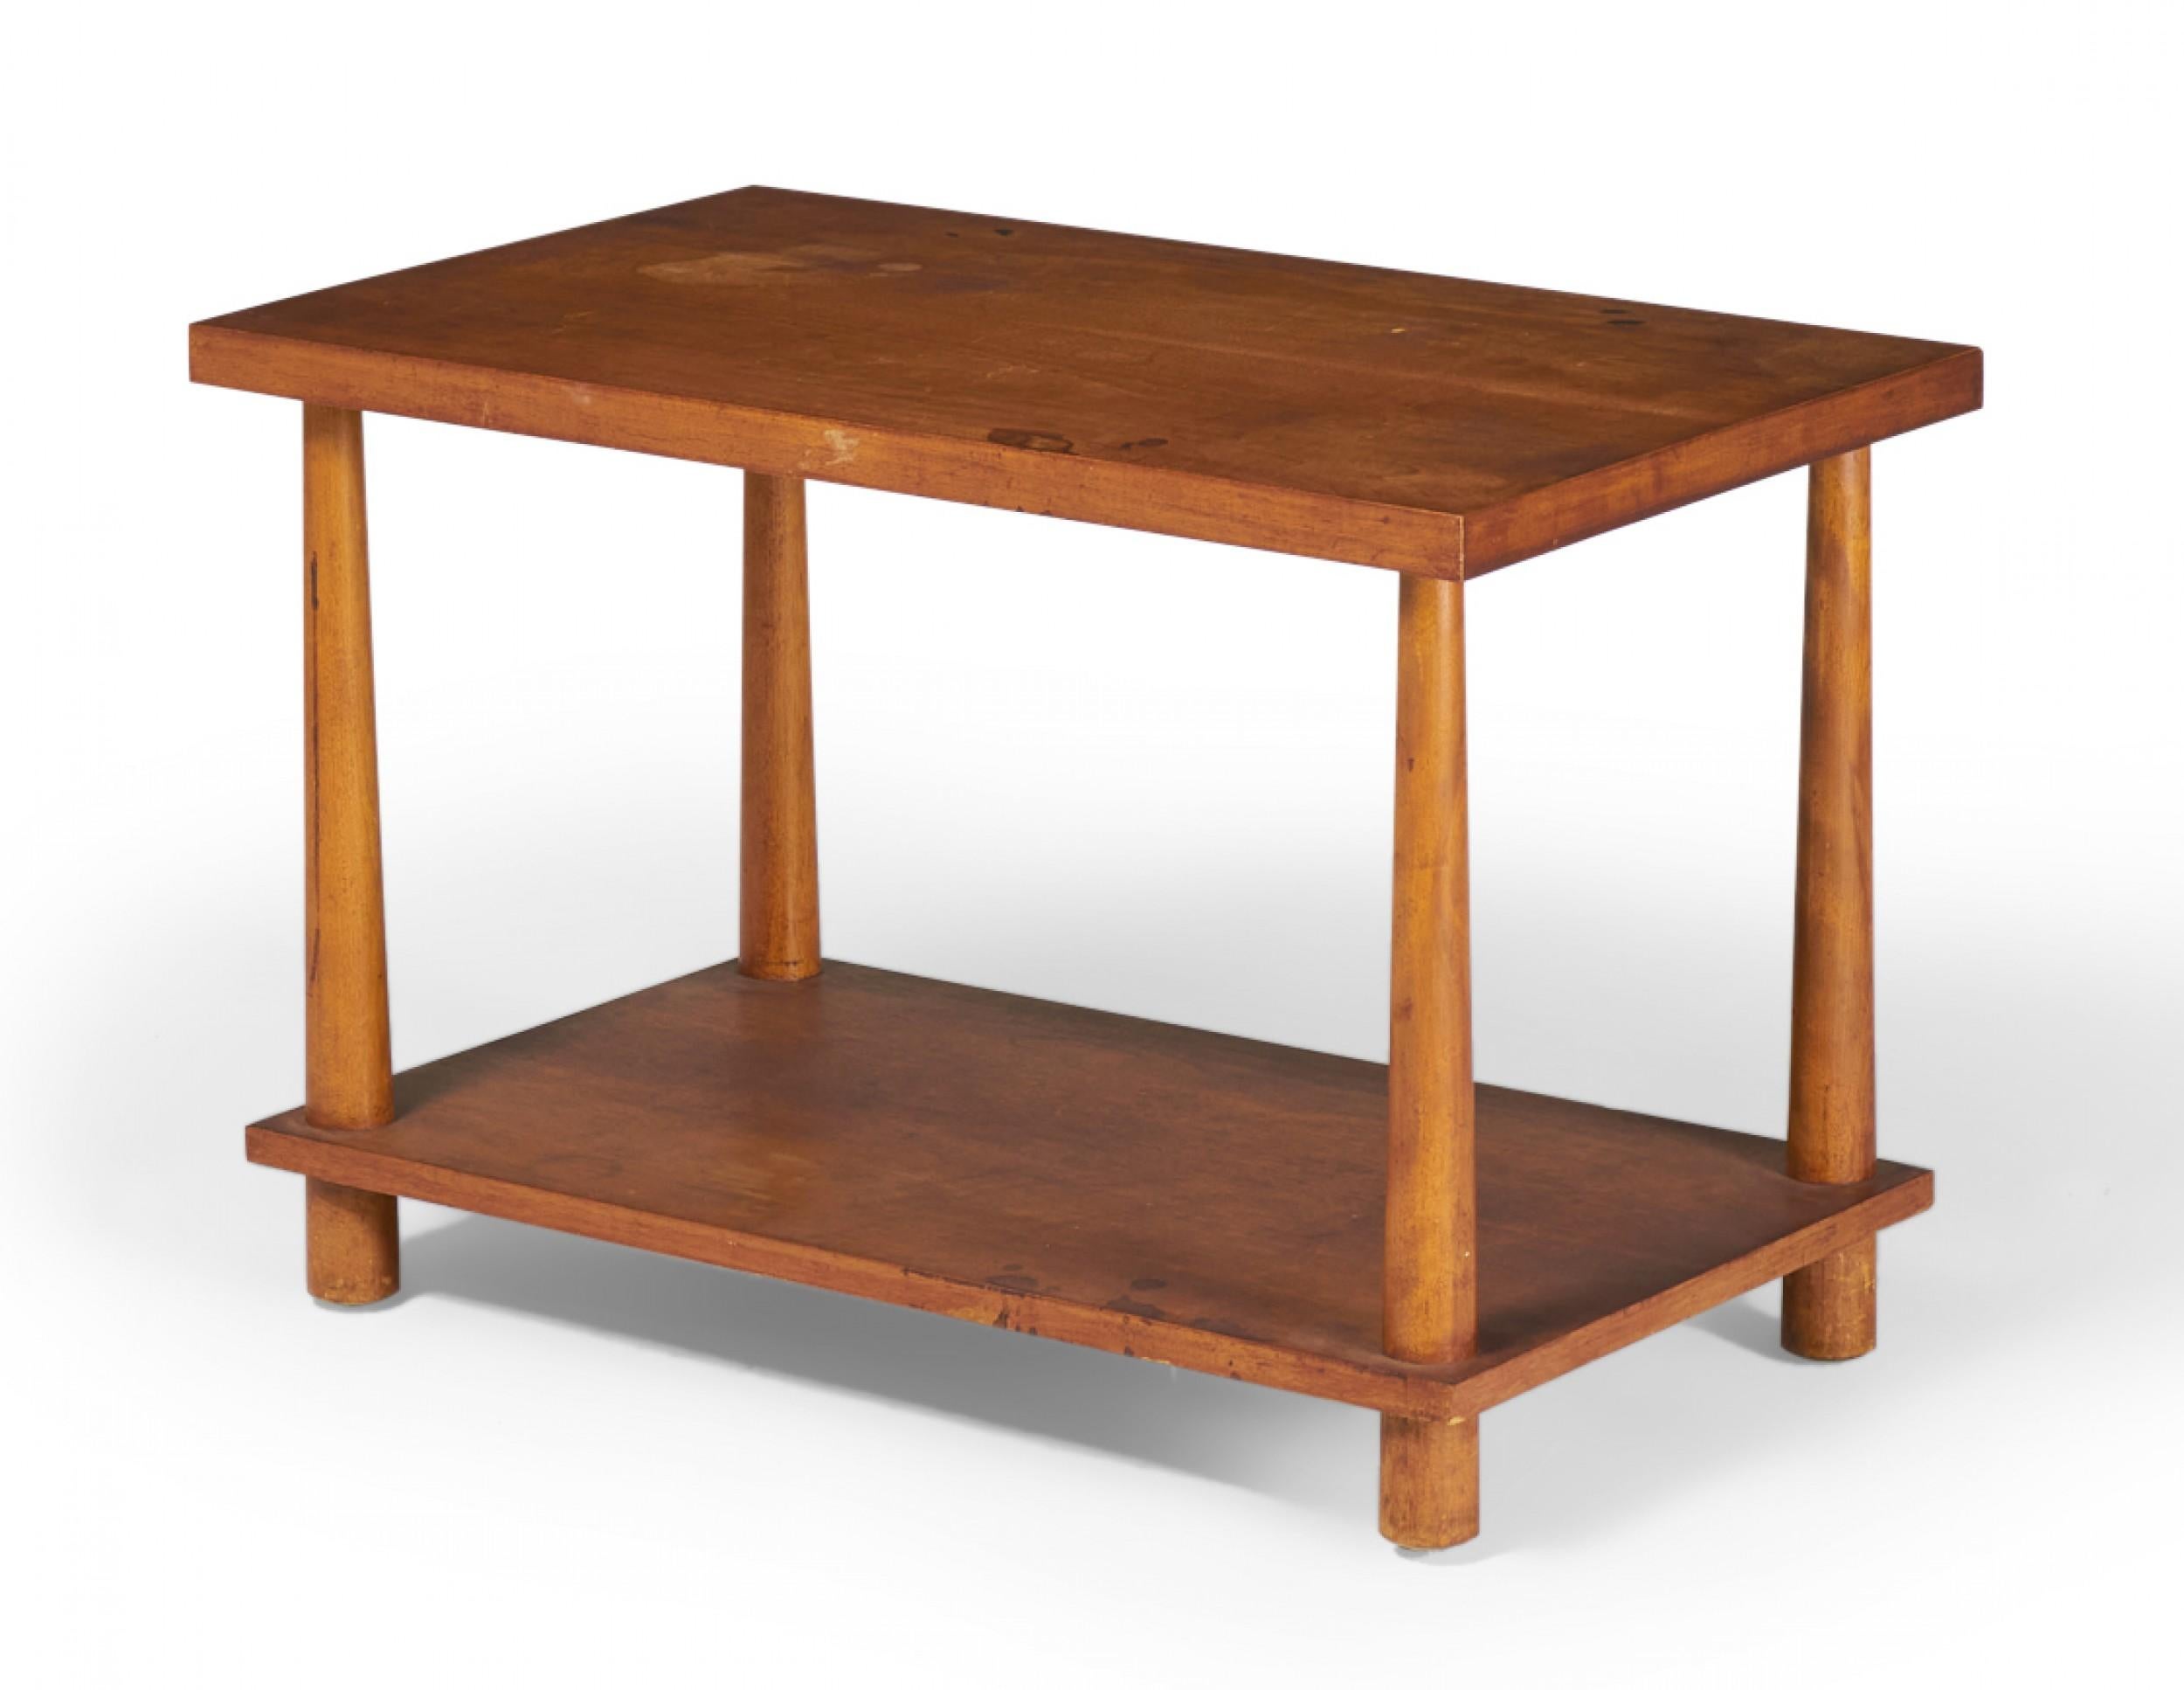 PAIR of American Mid-Century maple end / side tables with a rectangular two-tiered form with reverse tapered dowel legs connecting the lower shelf and tabletop. (T.H. ROBSJOHN-GIBBINGS FOR WIDDICOMB)(PRICED AS PAIR)(Similar tables: DUF0152E)
